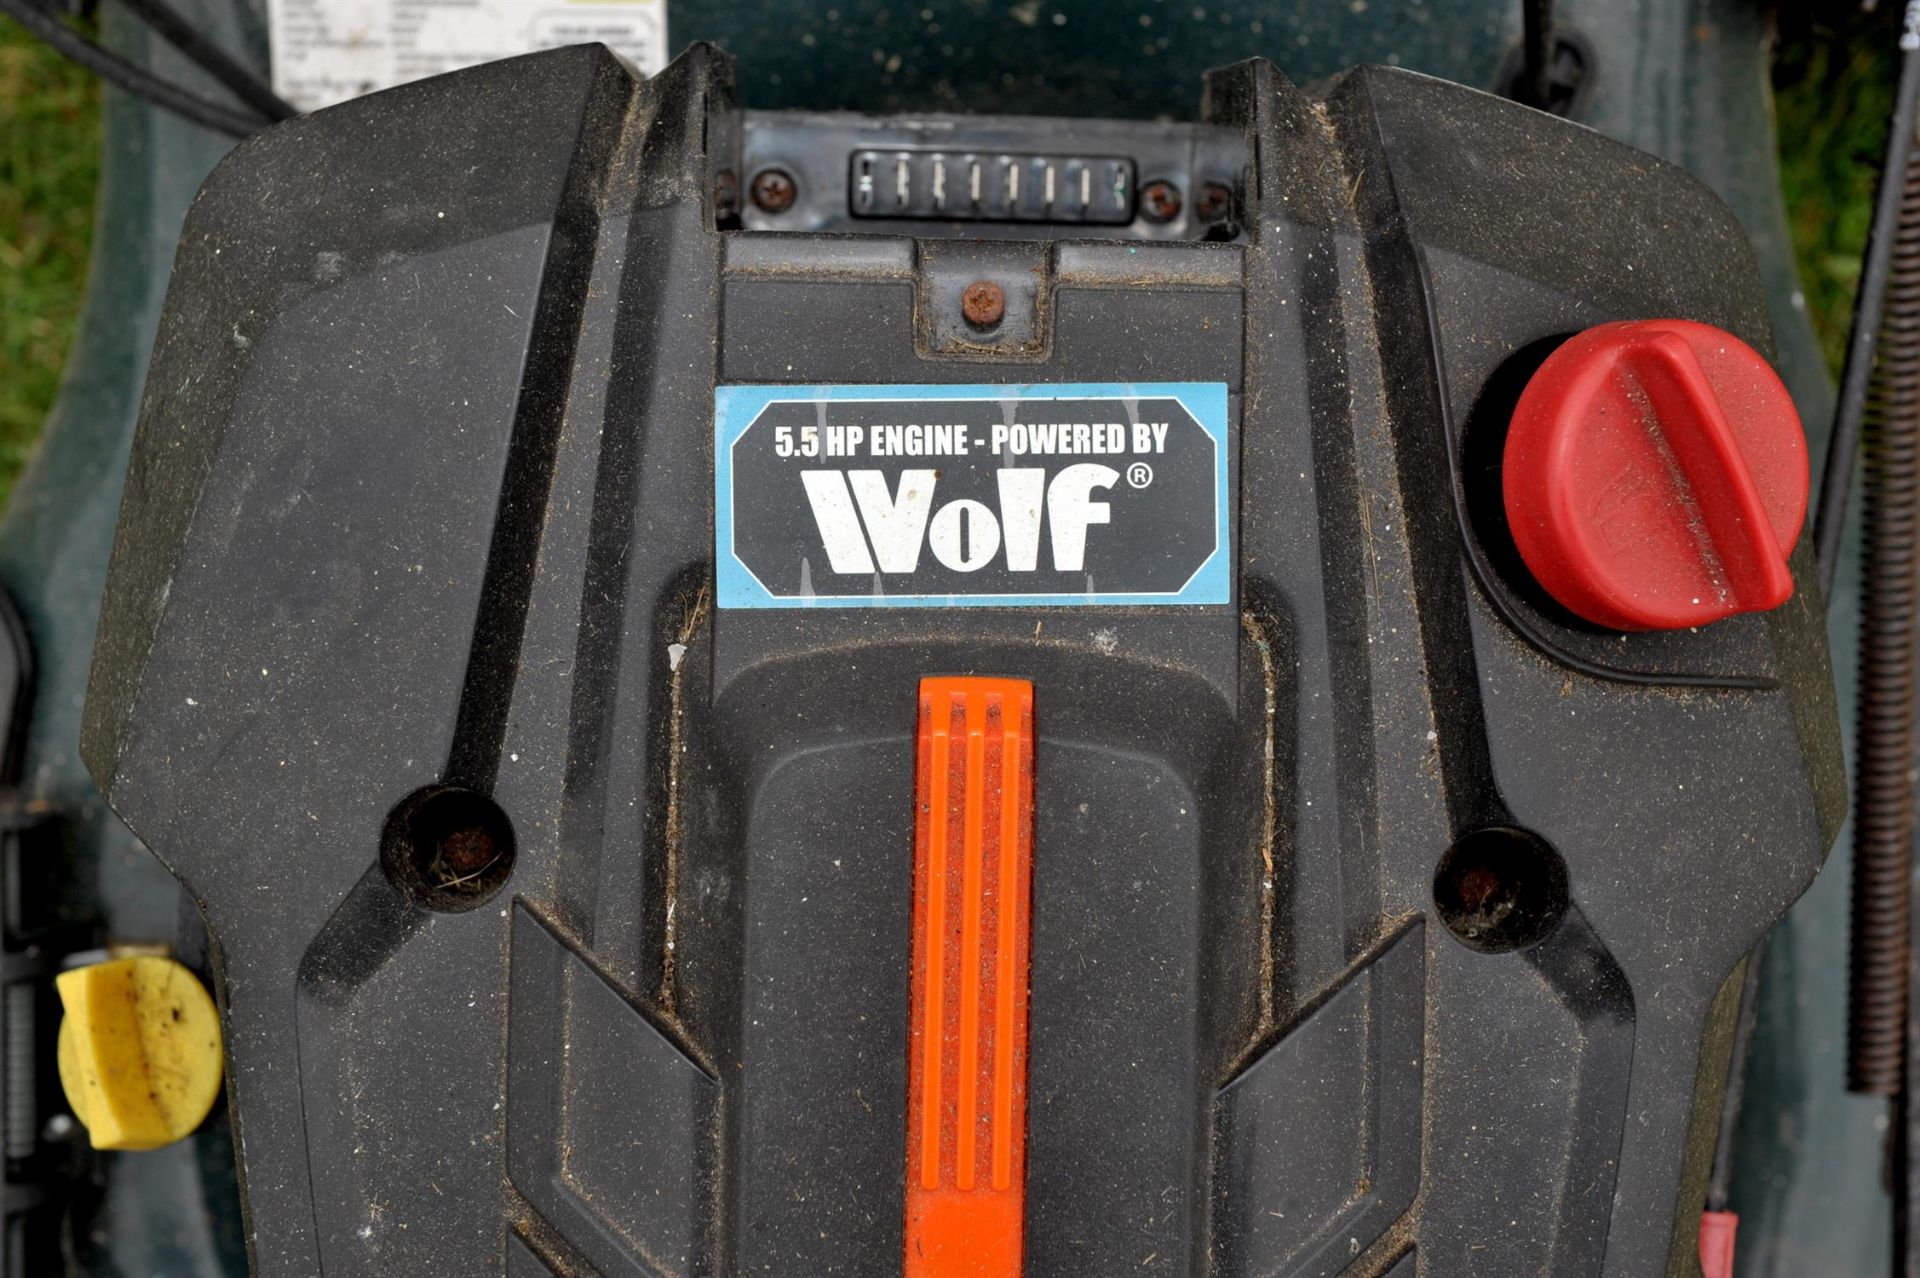 Wolf 5.5 HP Engine, two blade Lawn Racer Mower. PLEASE NOTE BUYERS PREMIUM AT THE STANDARD IN - Image 9 of 9